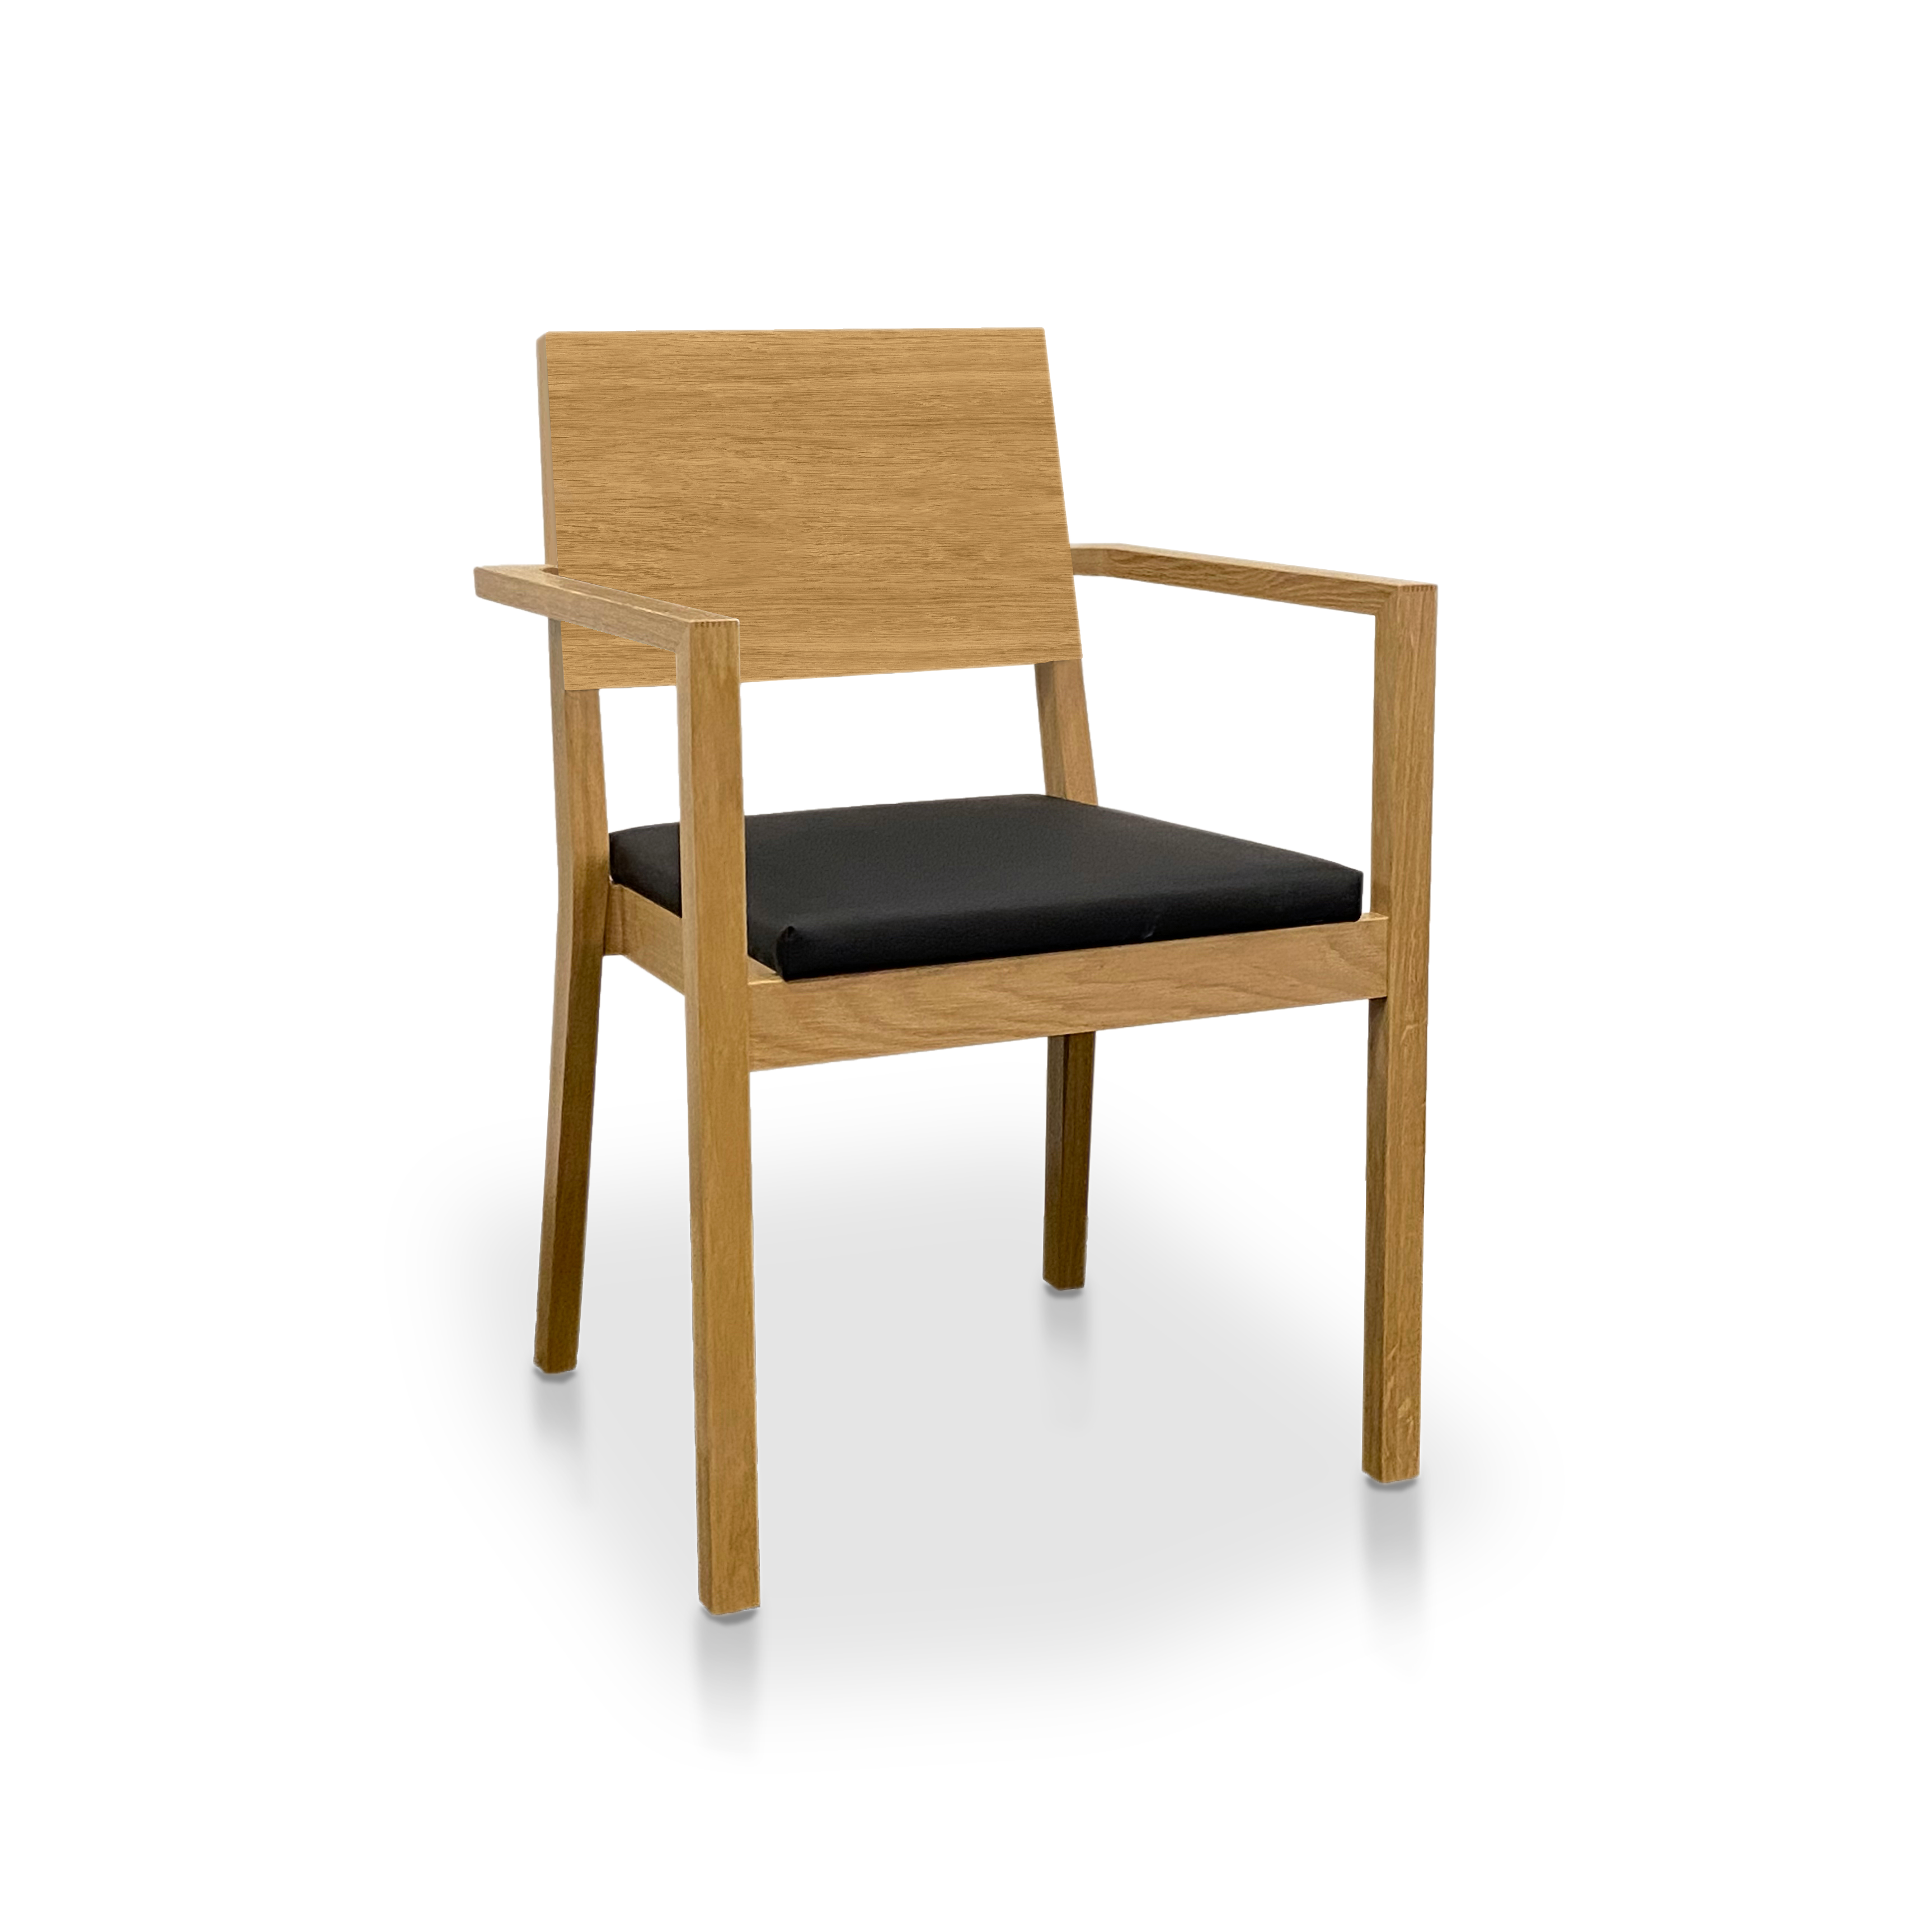 Lavabis classic stacking chair - 0